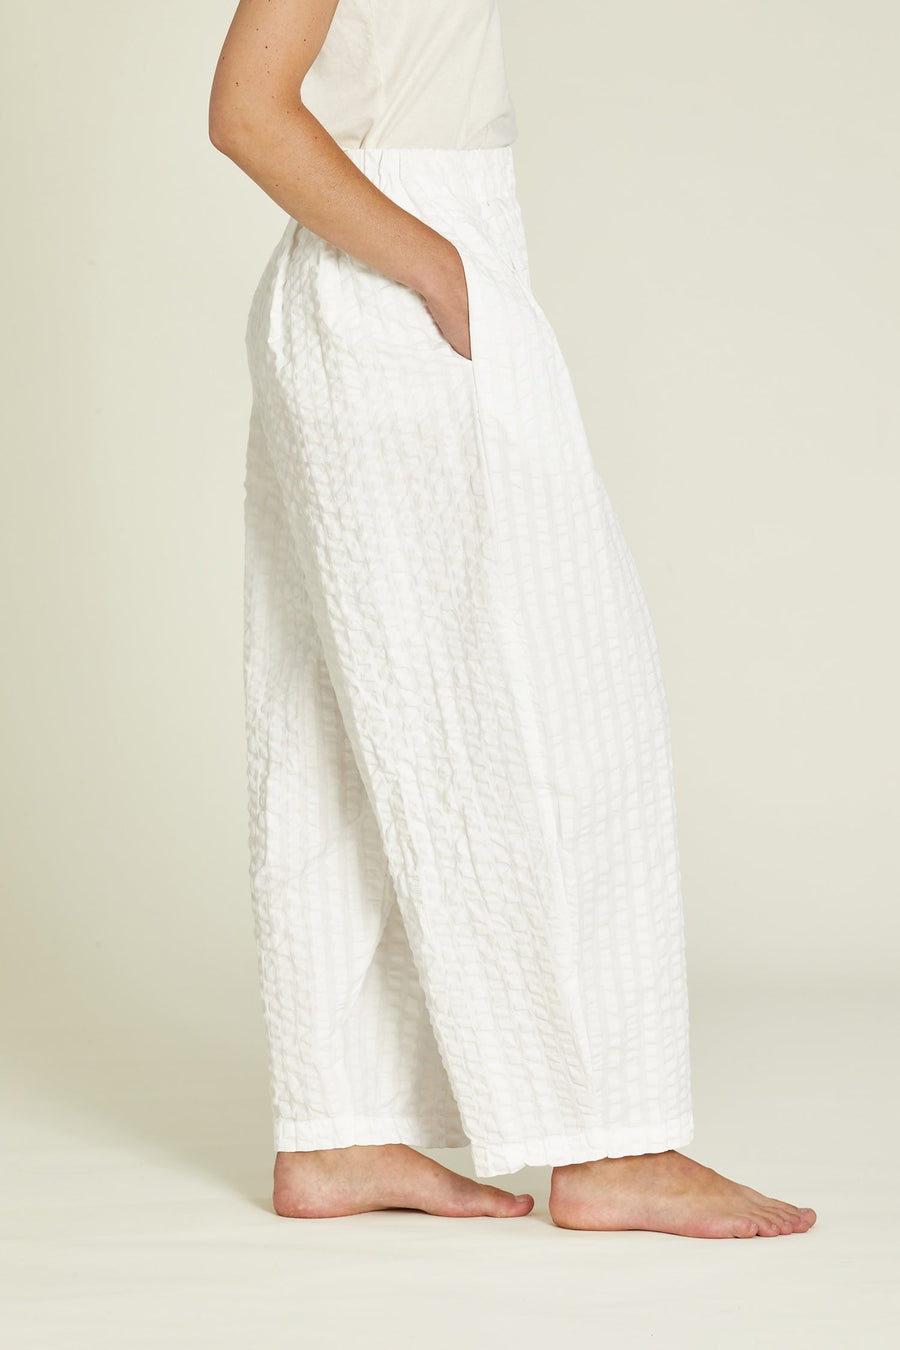 WIDE PANT - WHITE